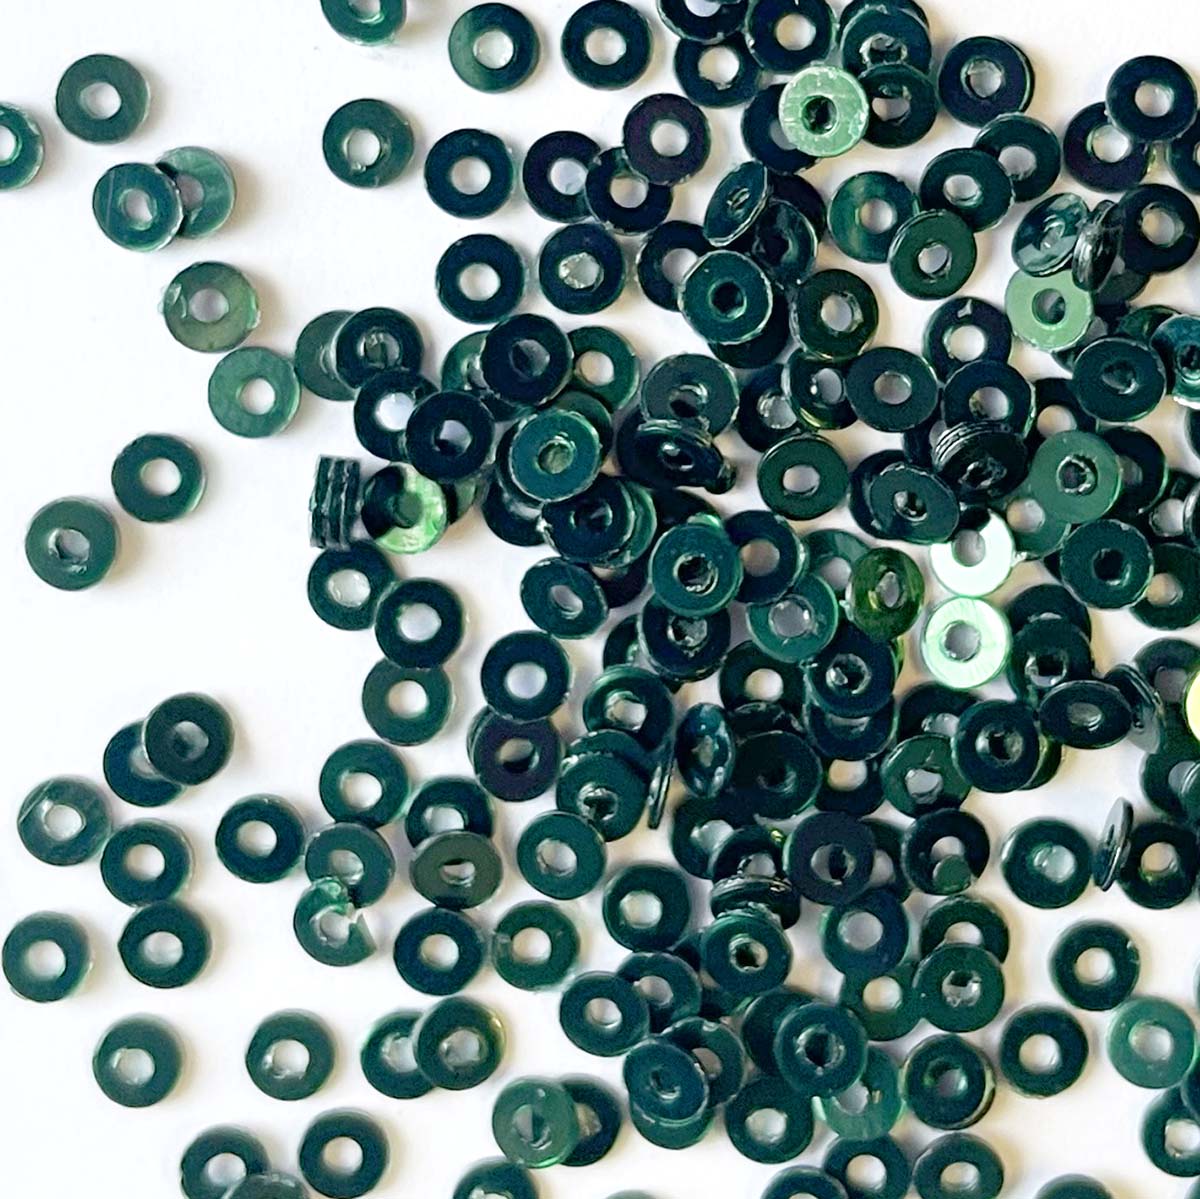 www.colourstreams.com.au Colour Streams Embroidery Stitching Embellishments Costumes Theatre Sequins Shiny Glitter Flat Circle Dark Green 3mm S221